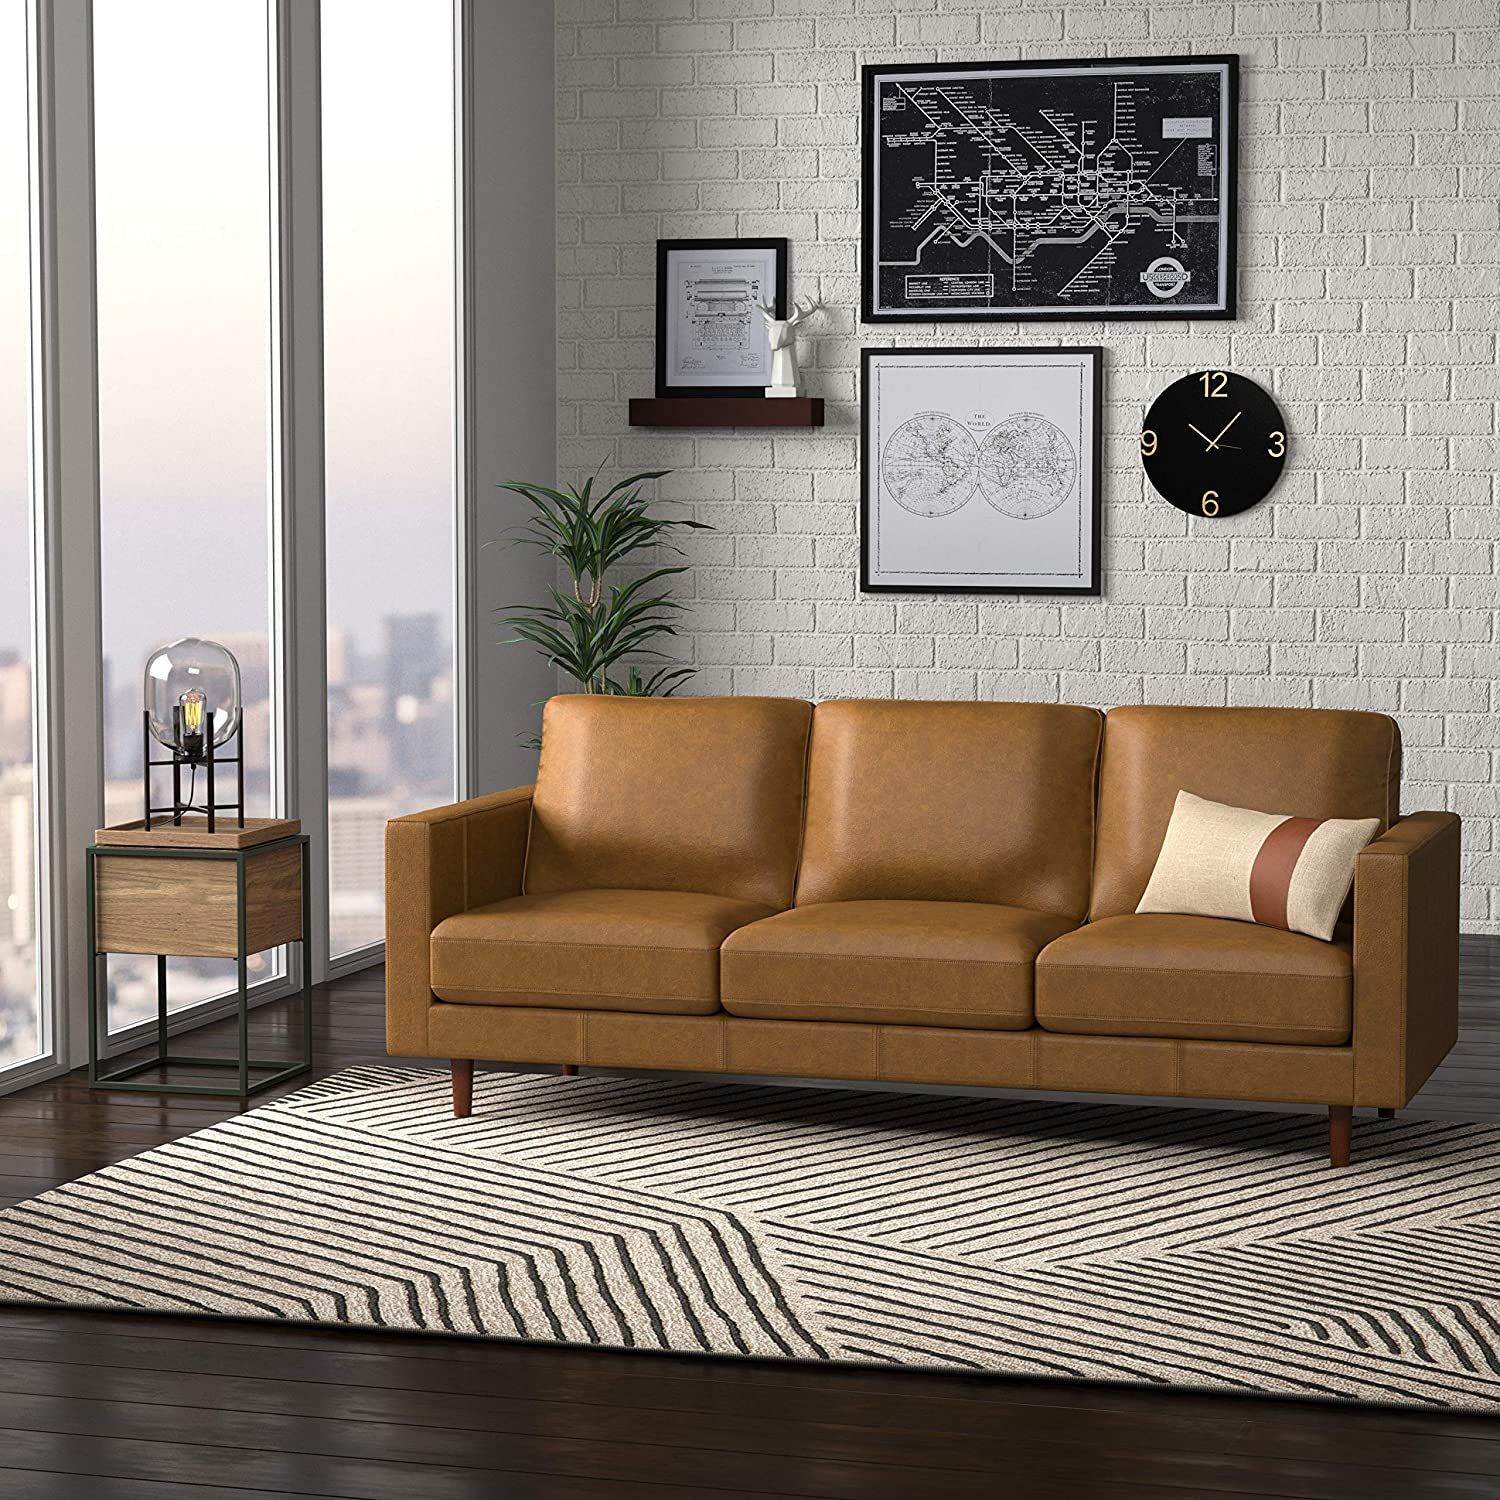 12 Best Leather Sofas To Buy Online In 2021